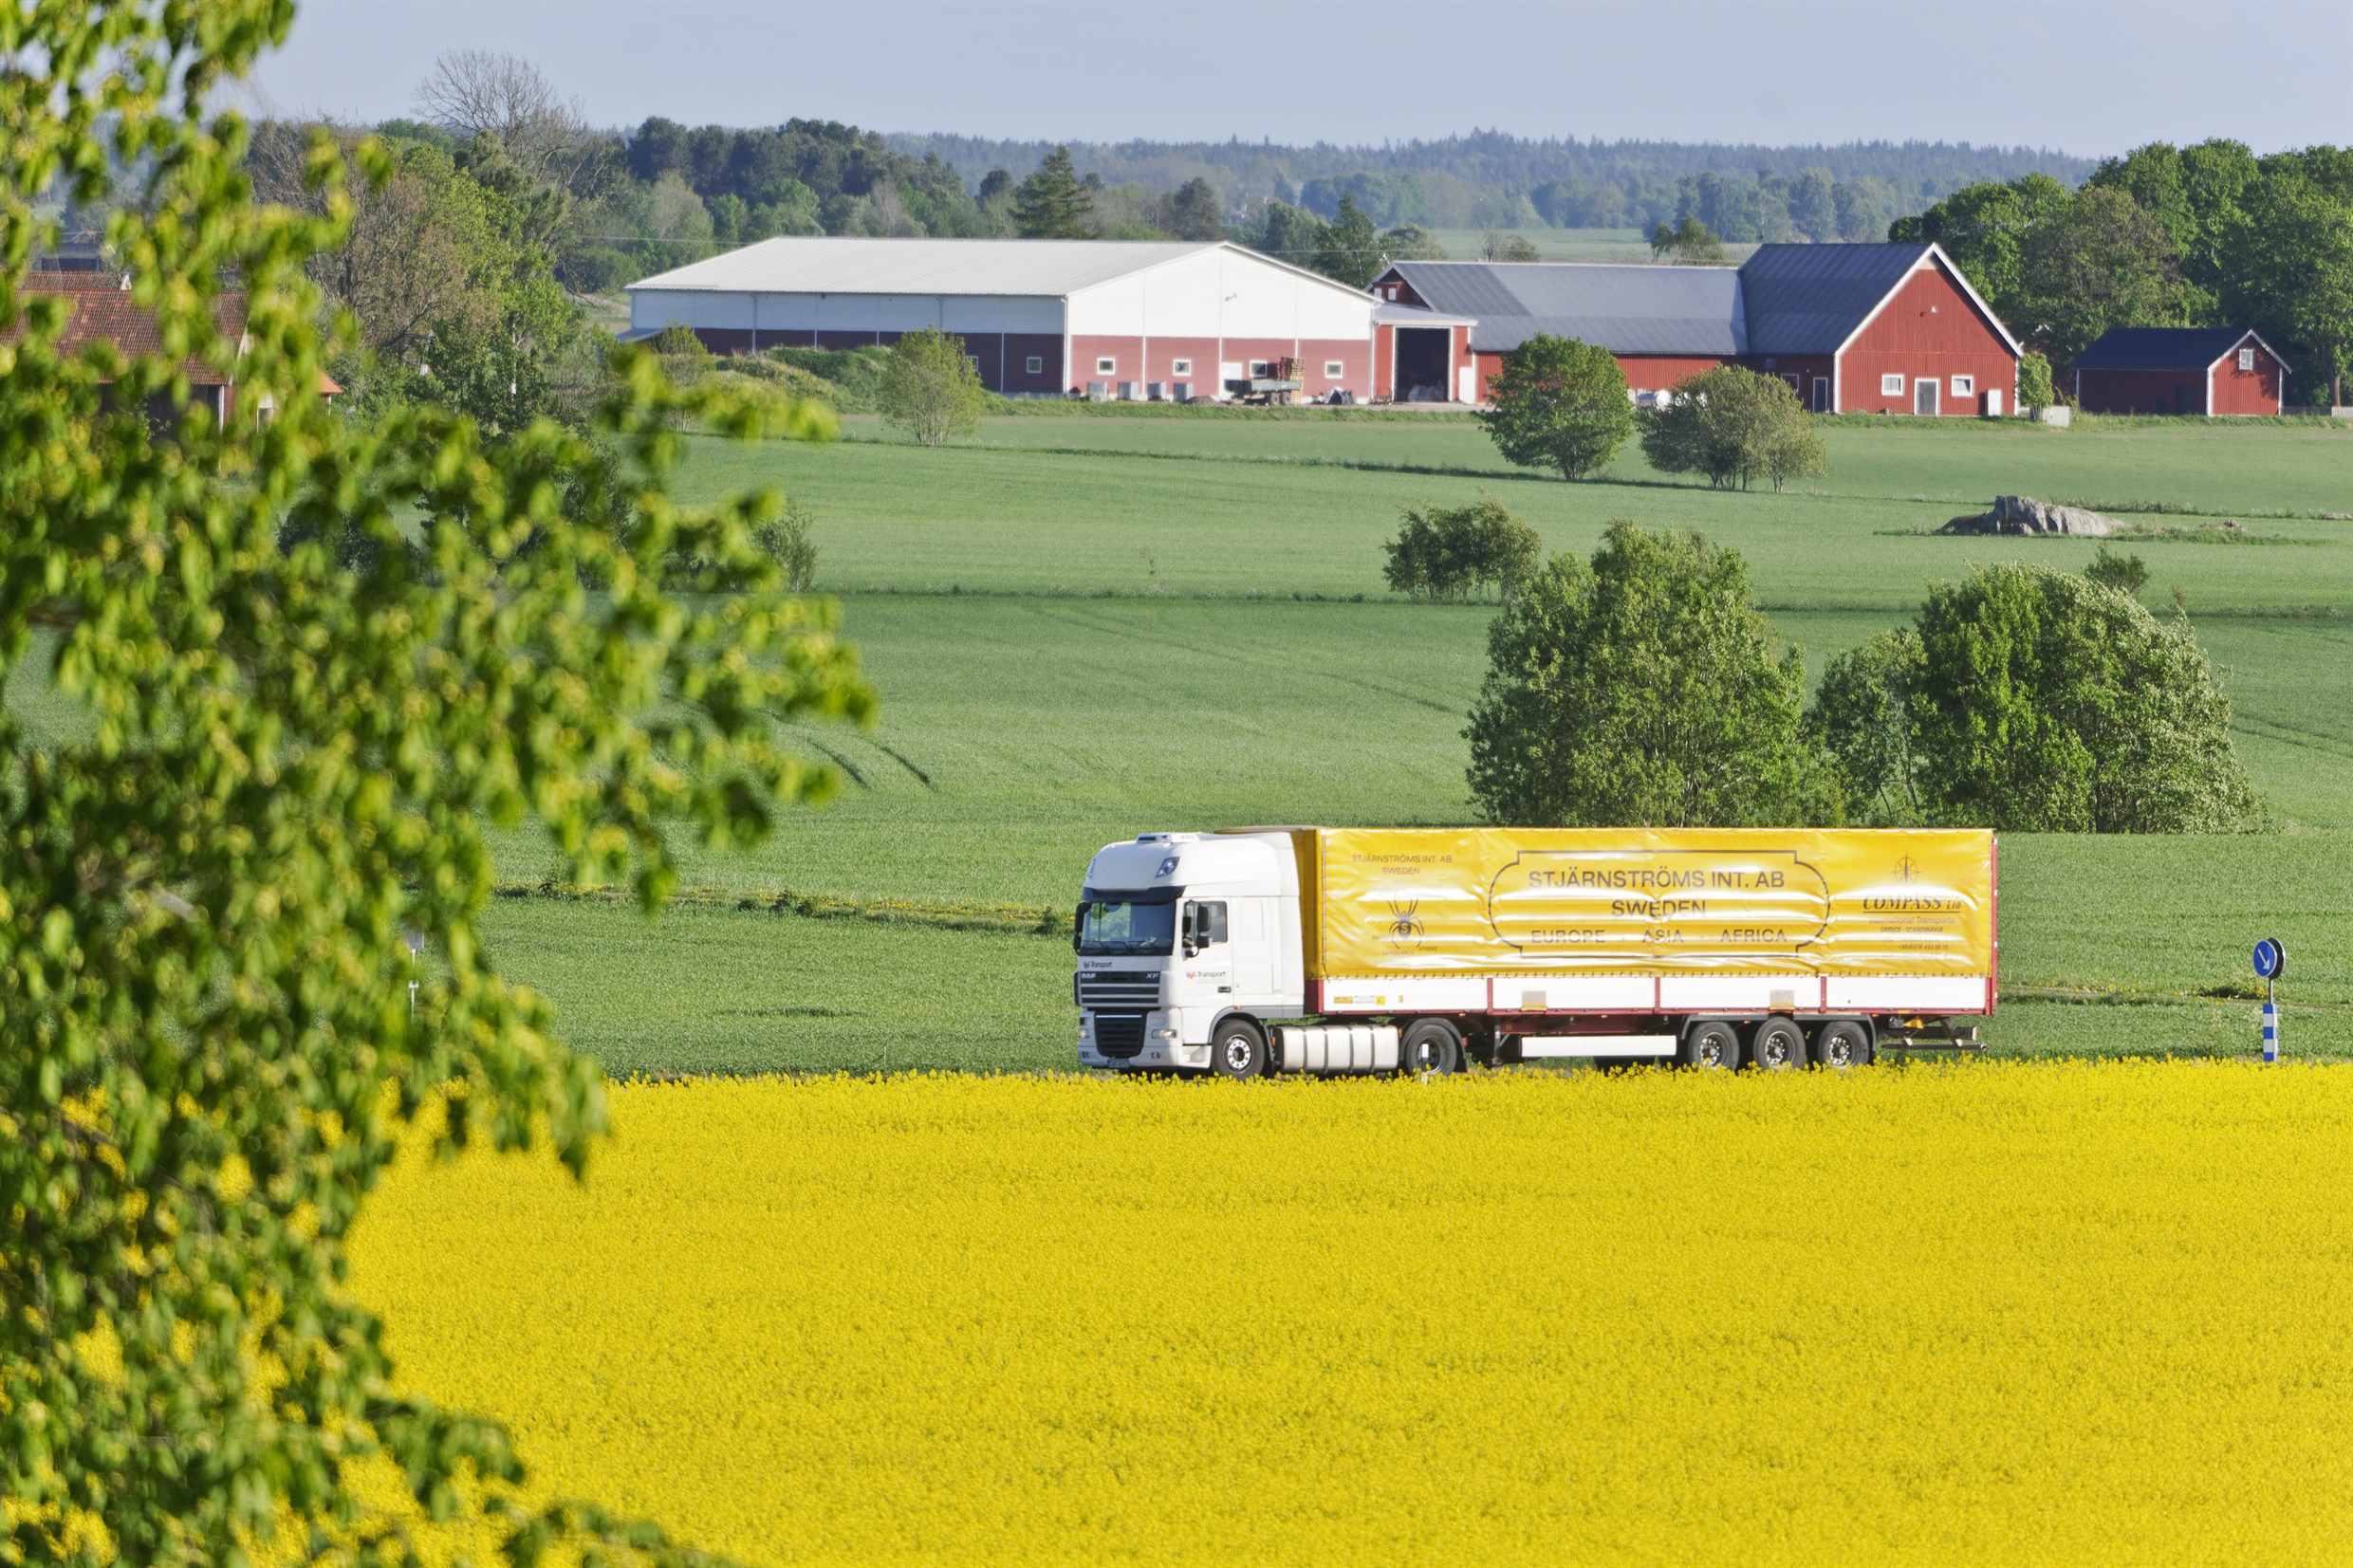 A lorry drives over a road that lies between a yellow flowering rape field in the foreground and a green field in the background. Buildings of a farm can be seen in the background.